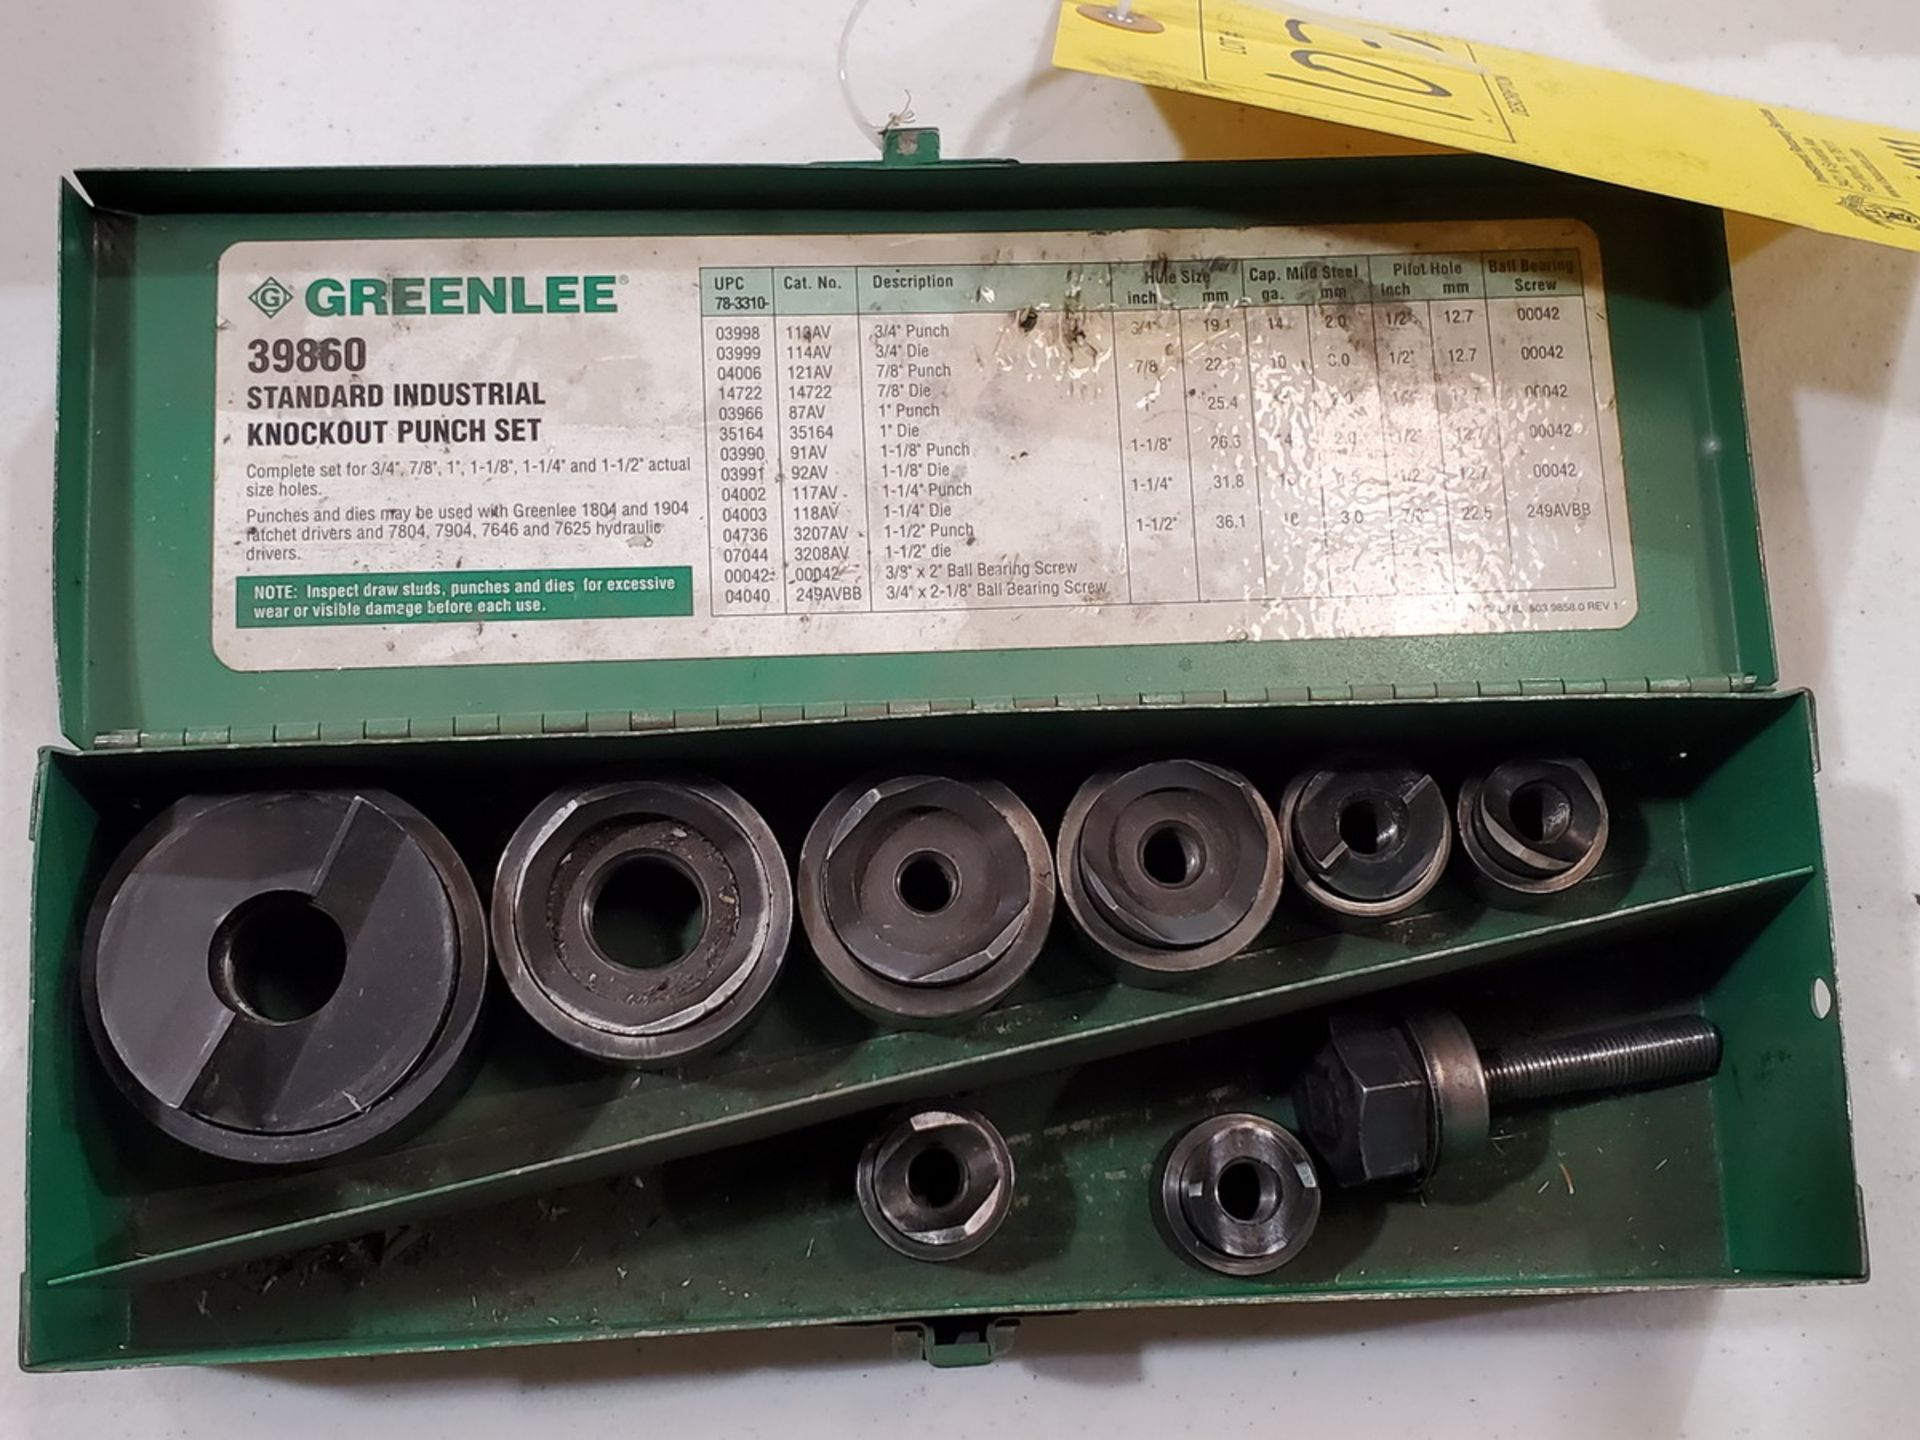 Greenlee 39860 Knockout punch Set 3/4"-1-1/2" Size Holes